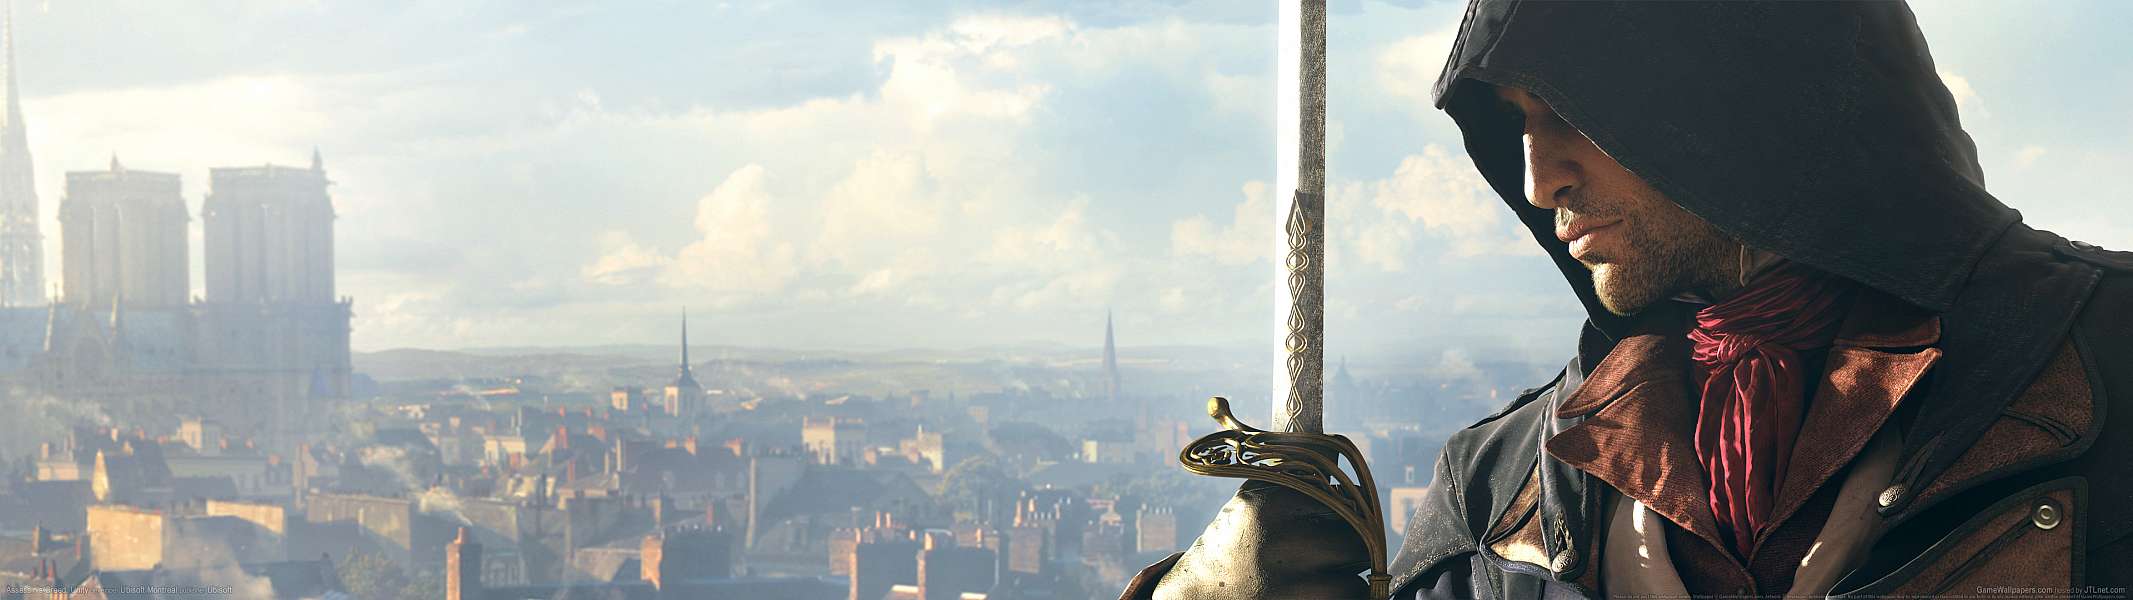 Assassin's Creed: Unity dual screen achtergrond